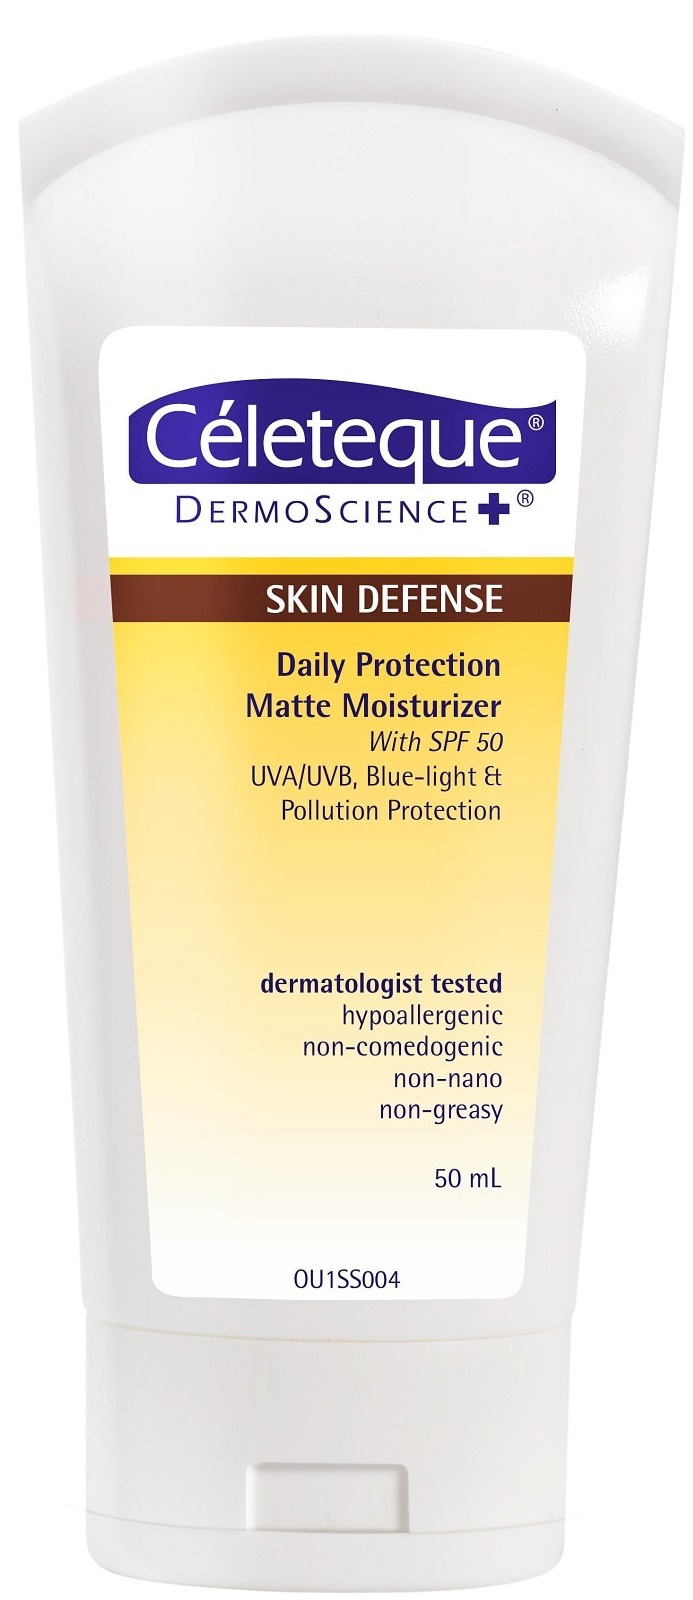 Celeteque Skin Defense Daily Protection Matte Moisturizer With SPF 50